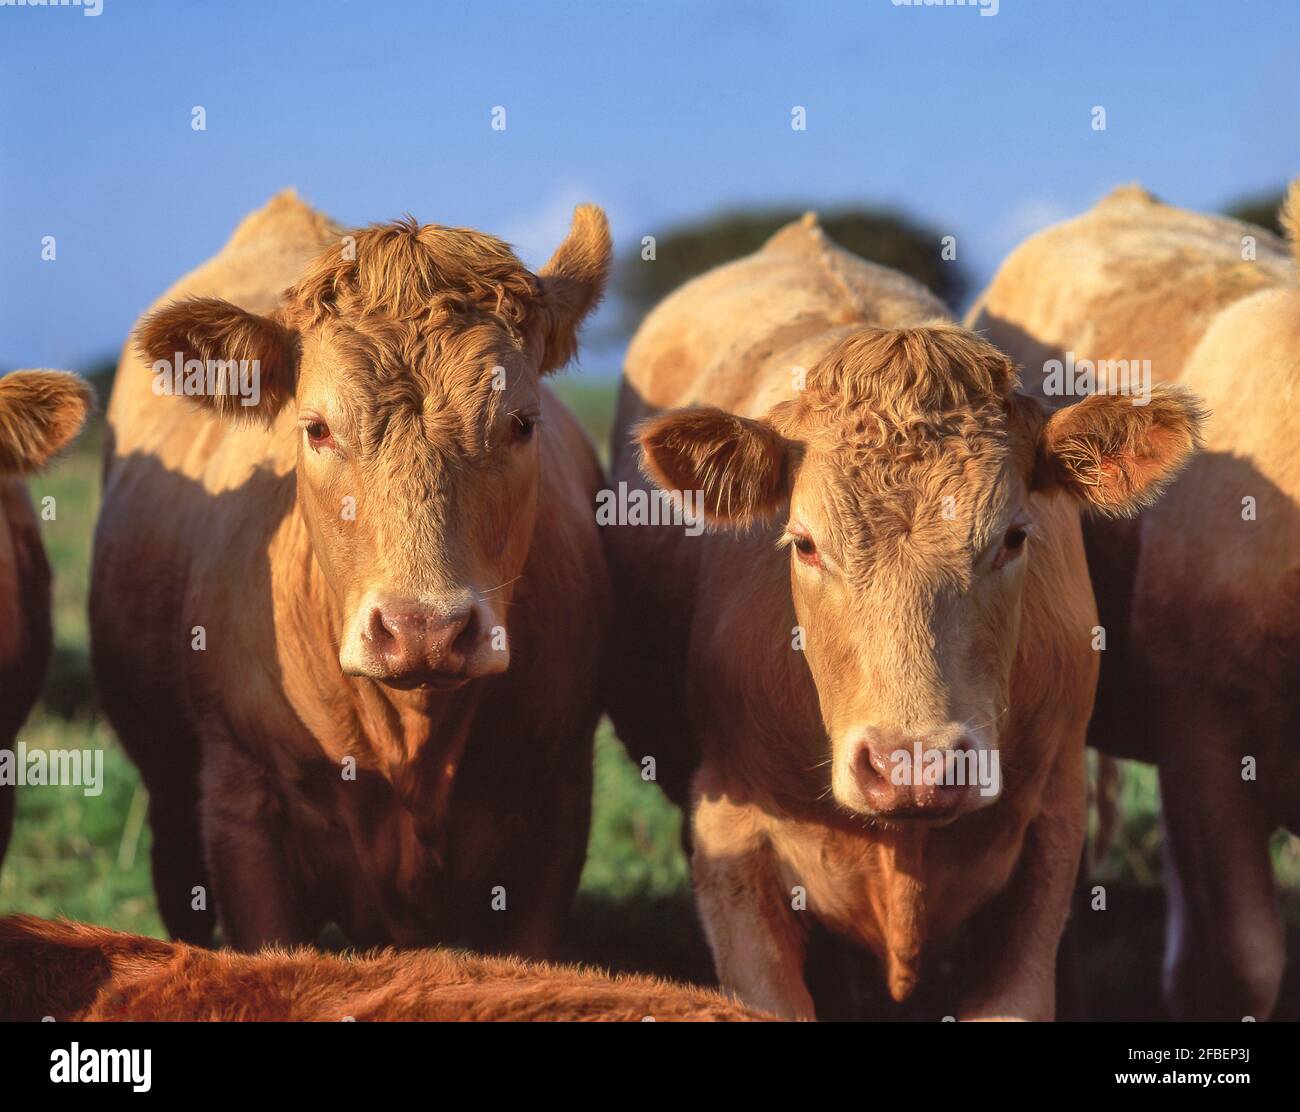 Cattle in field, Wiltshire England, United Kingdom Stock Photo